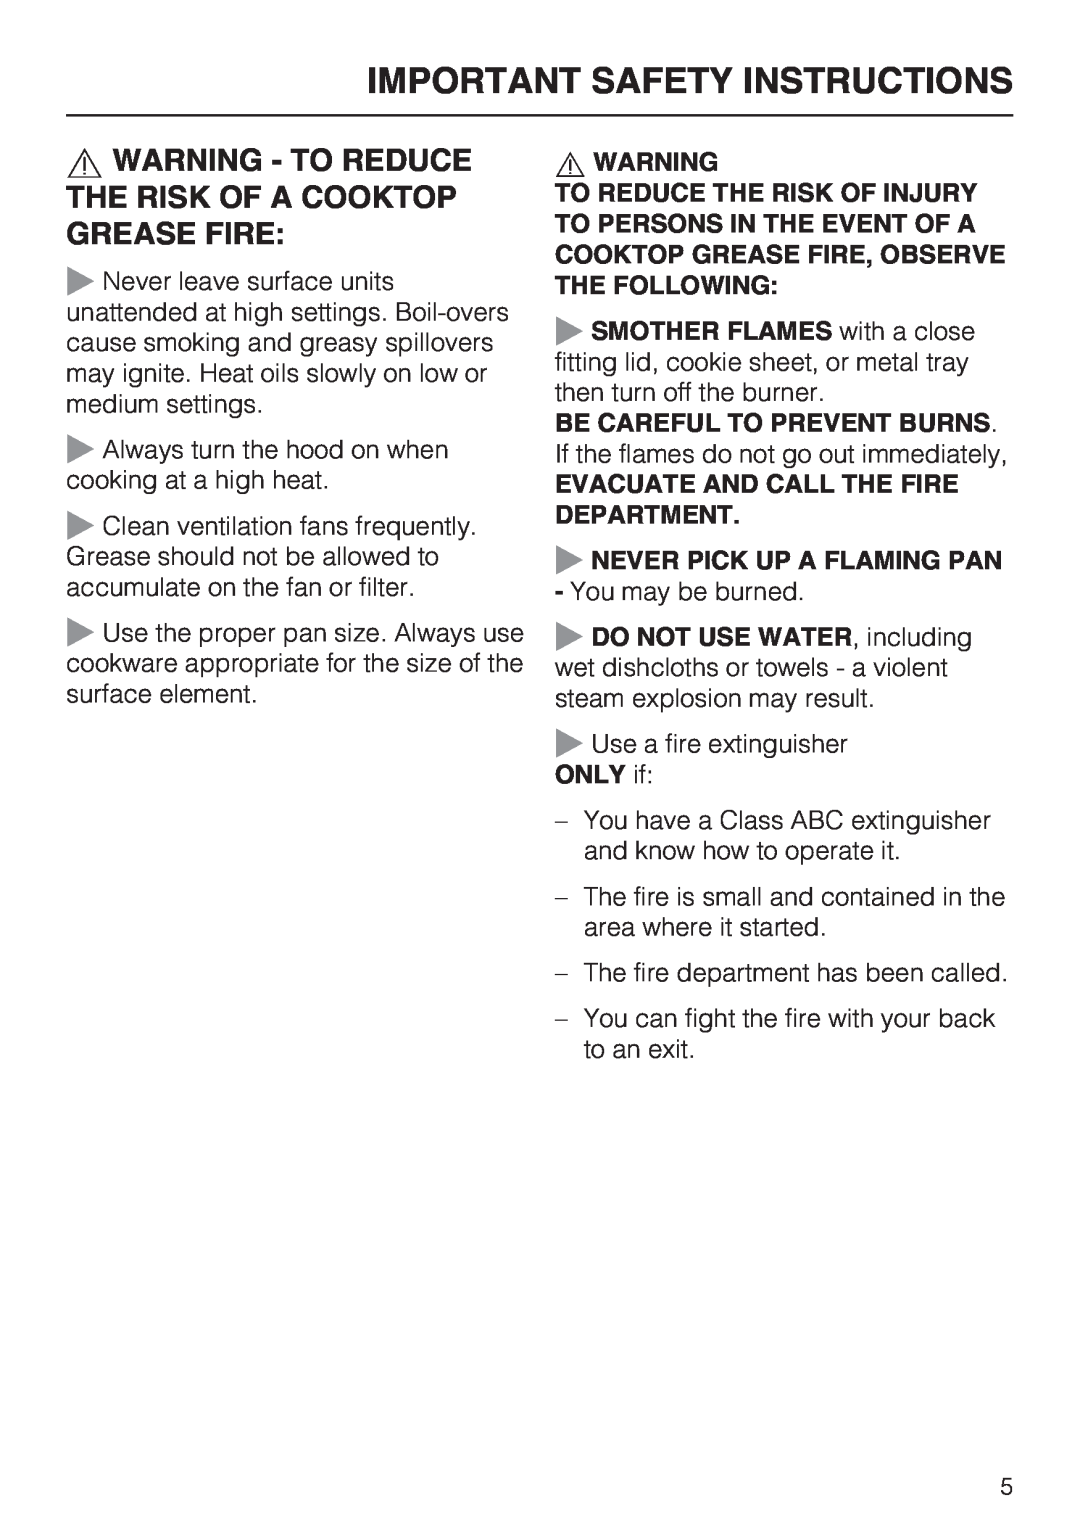 Miele DA 5100 D installation instructions Important Safety Instructions, Evacuate And Call The Fire Department 